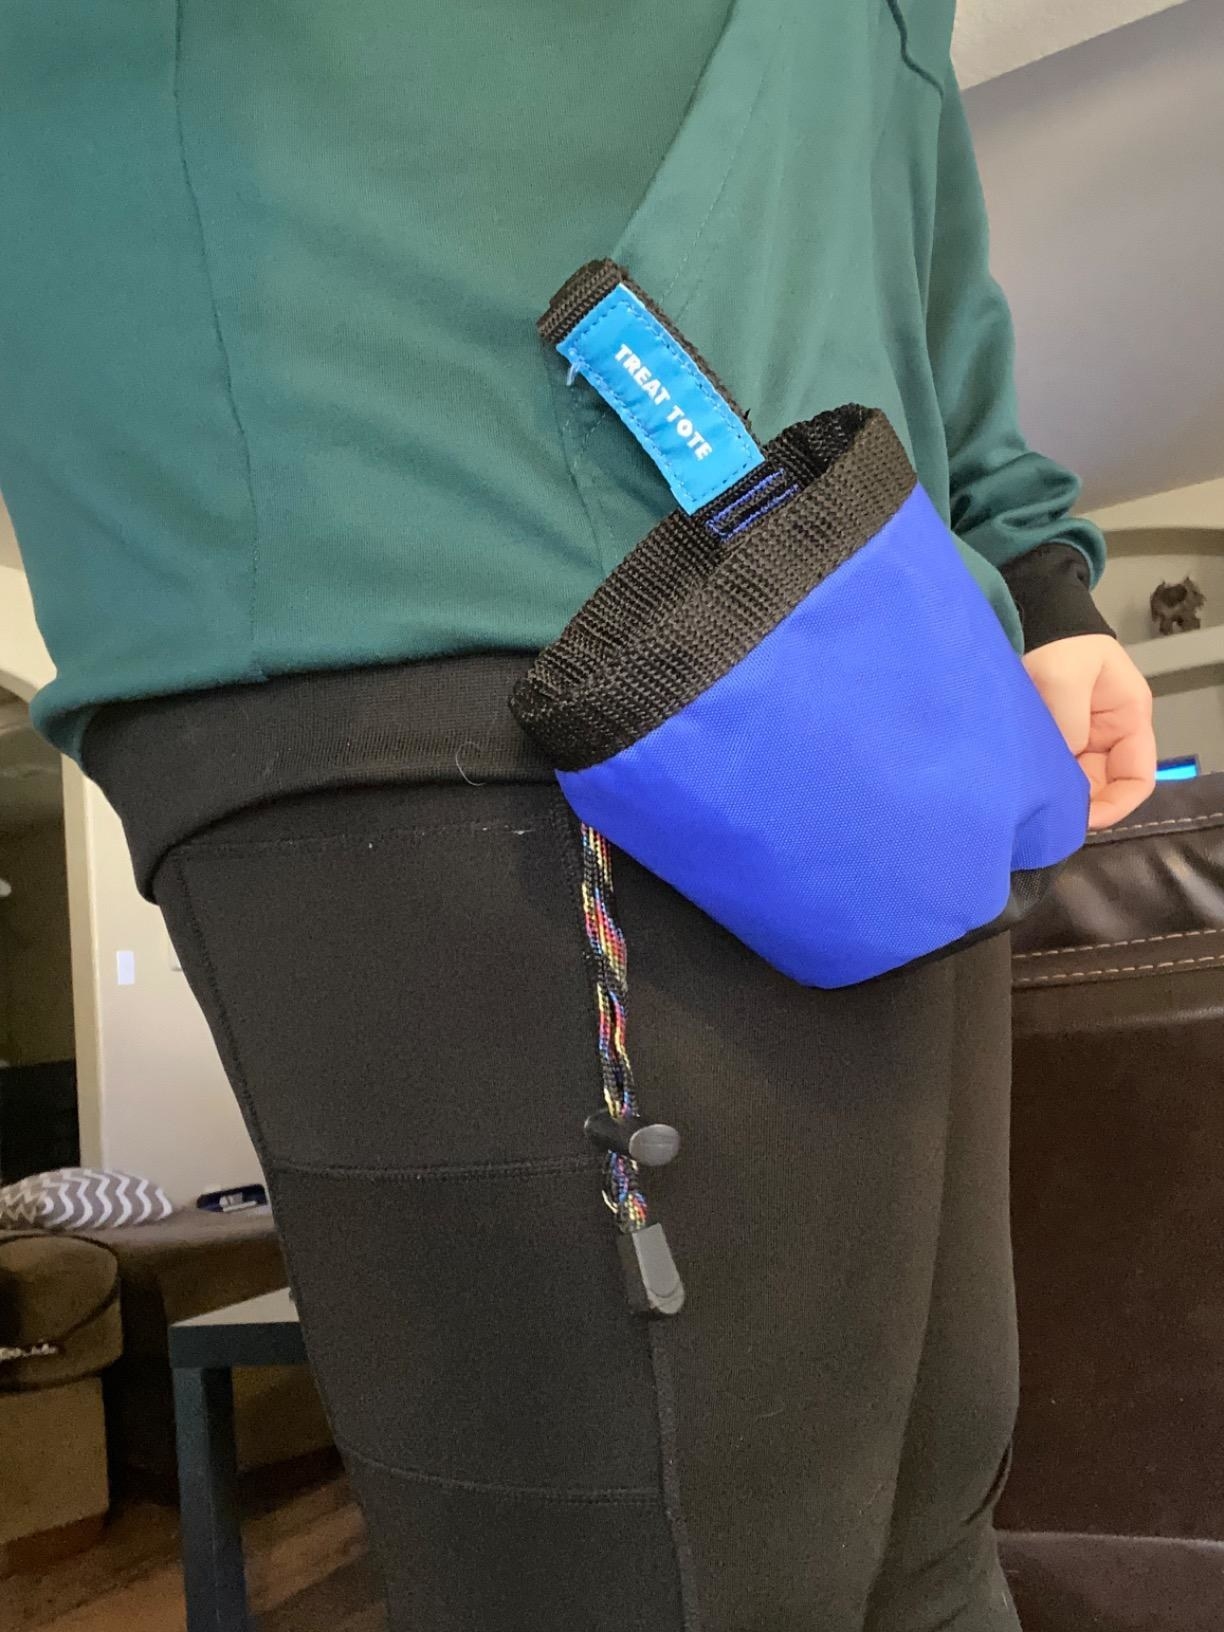 A reviewer wearing the treat tote clipped to the waistband of their pants